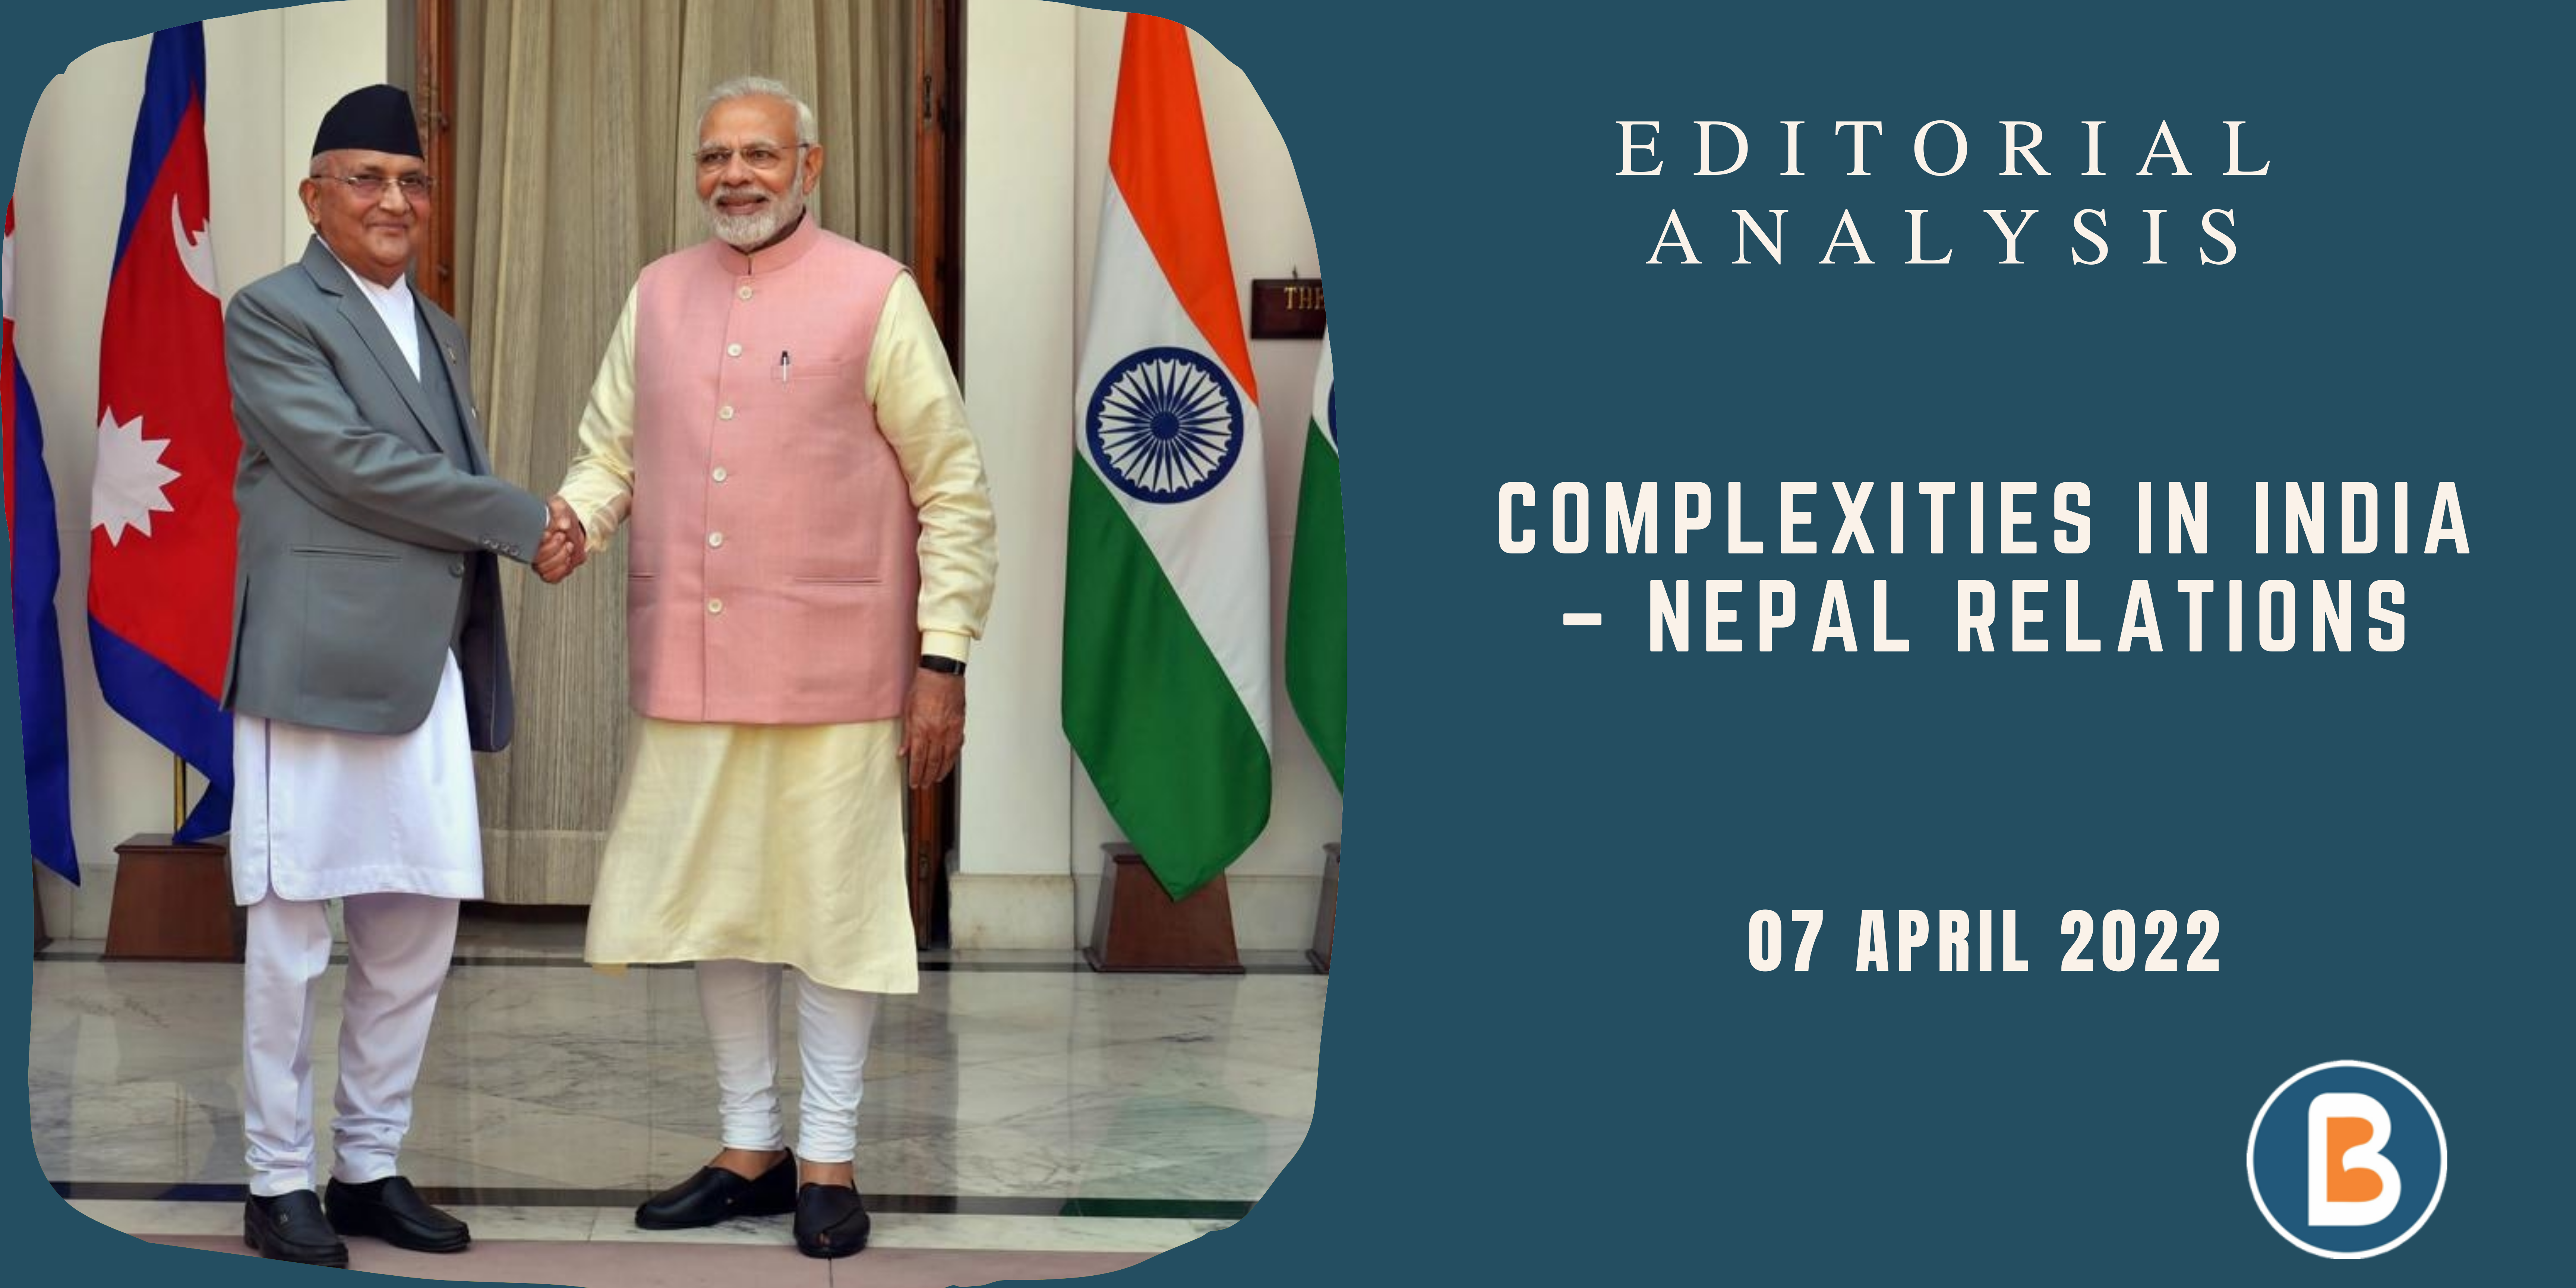 Editorial Analysis for IAS - Complexities in India - Nepal Relations